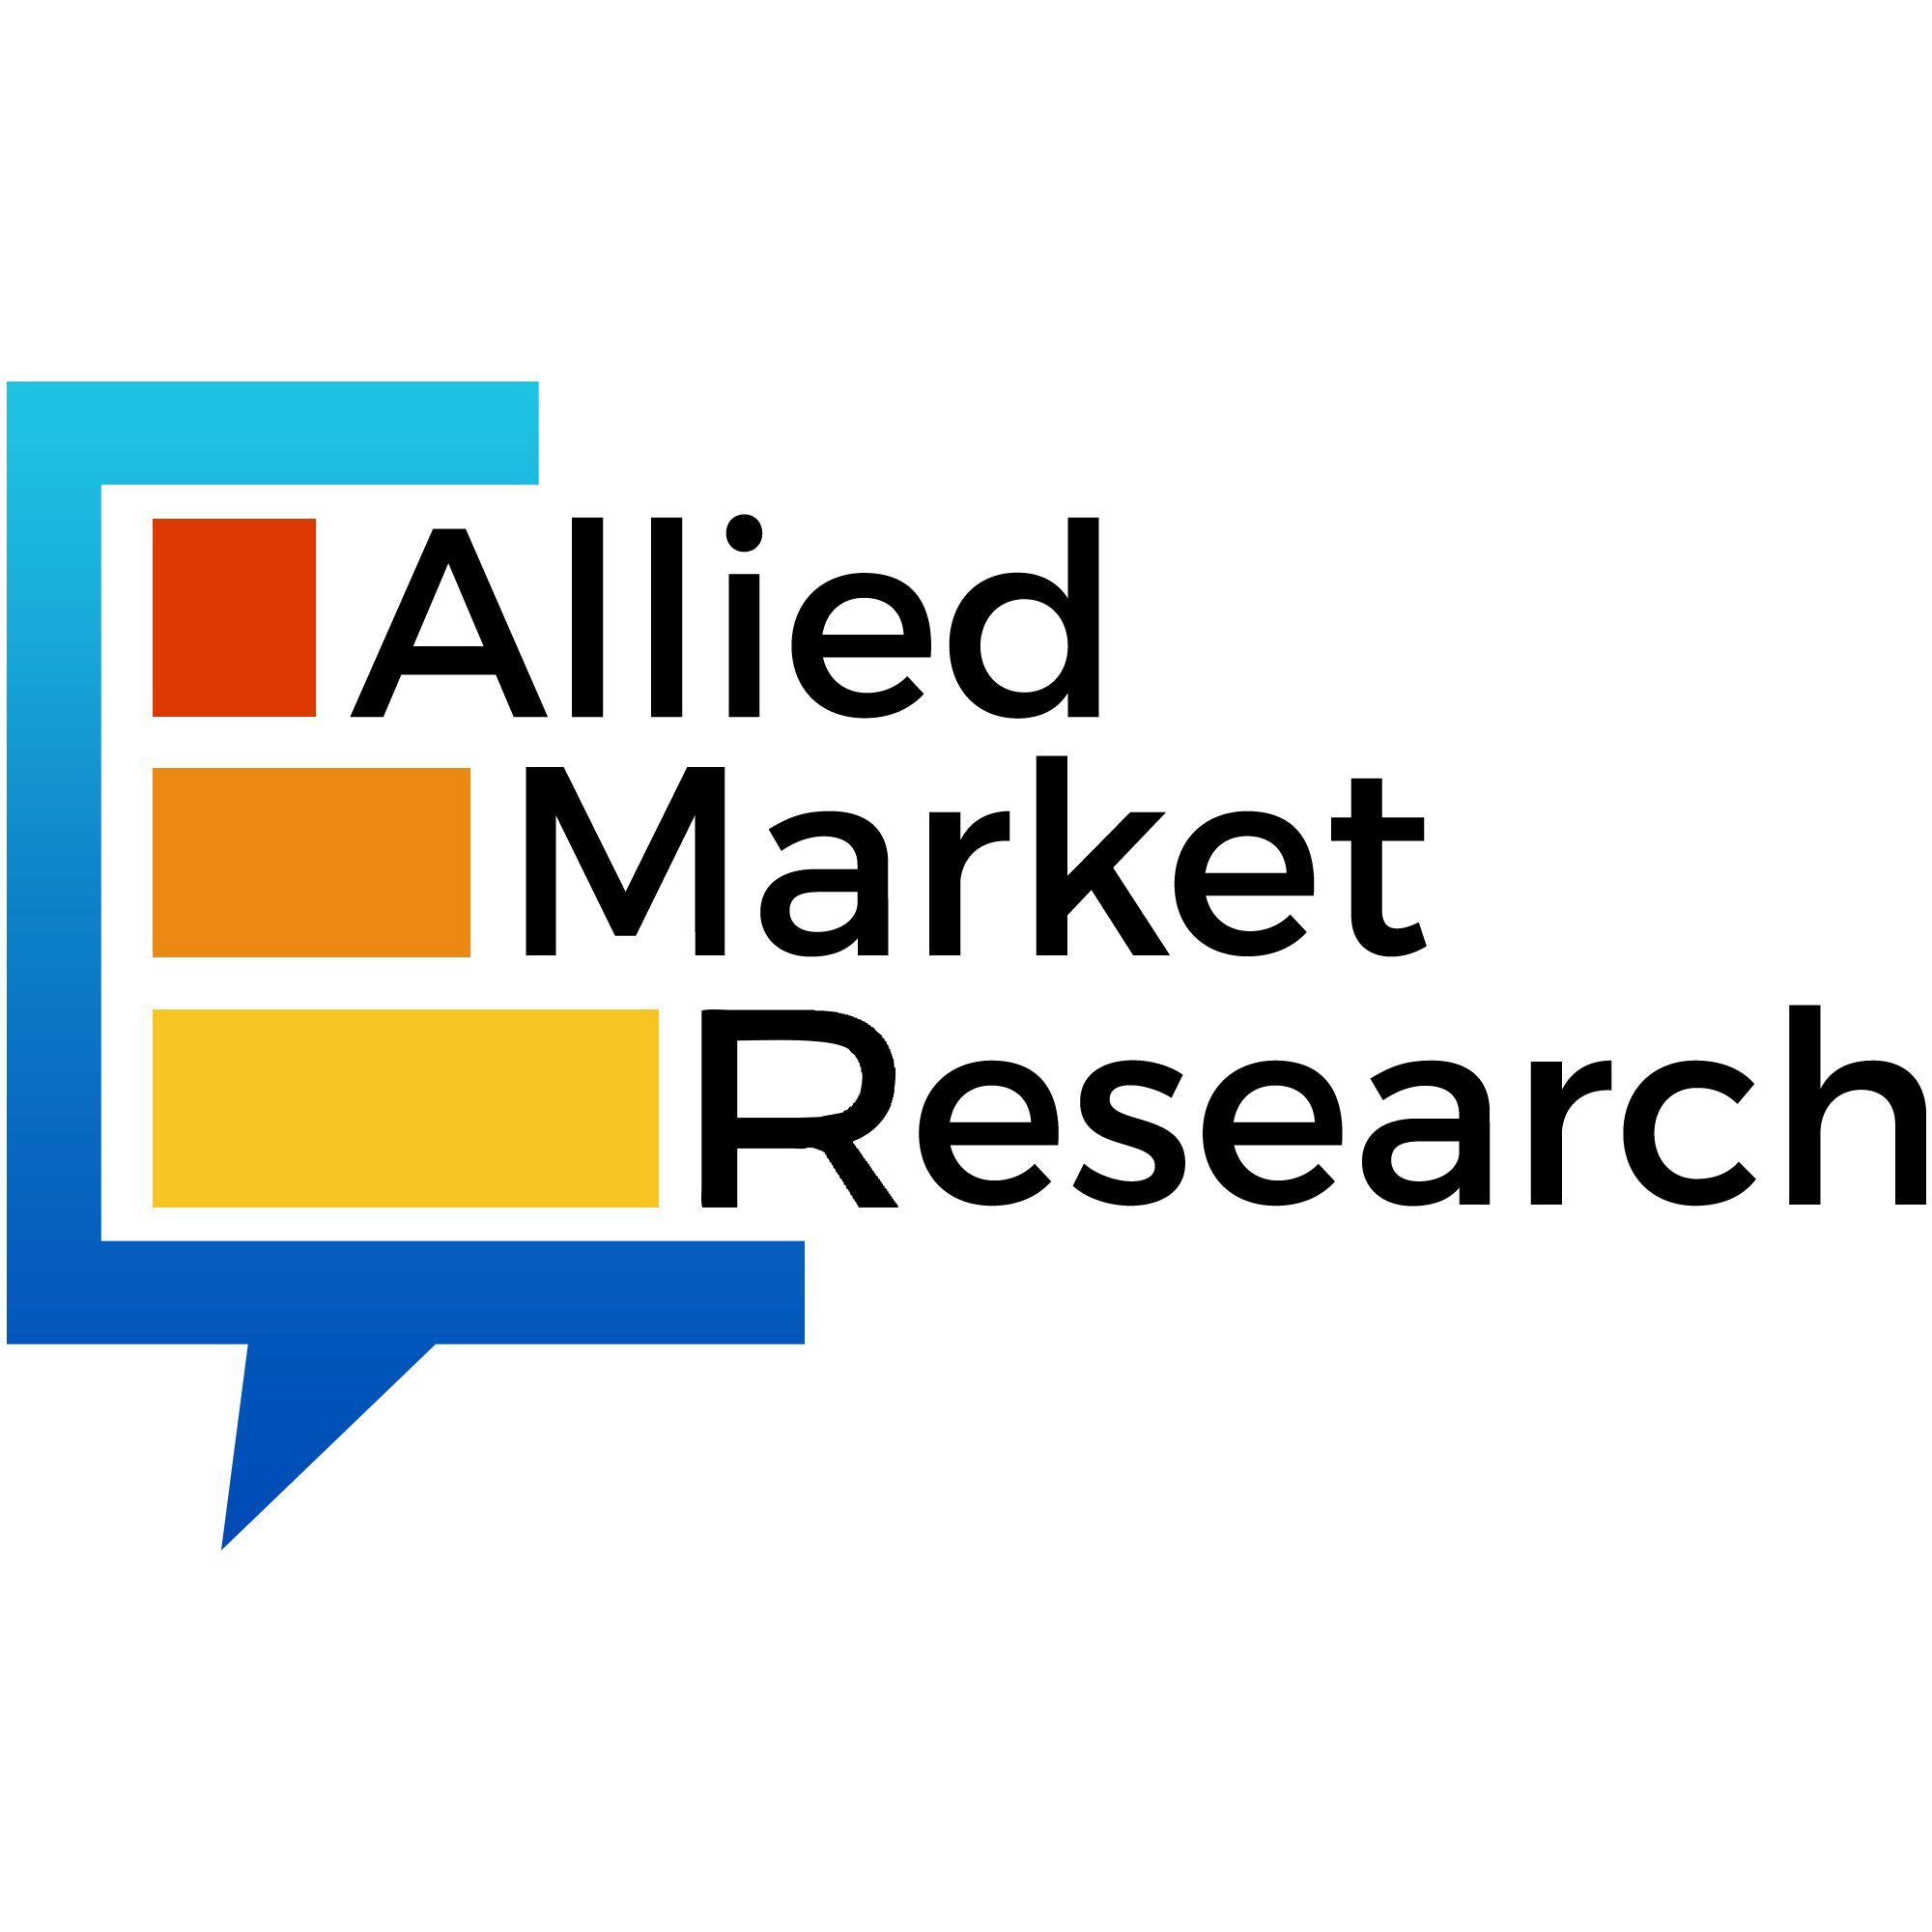 Used Cars Market to Reach $1,355.15 Bn, Globally, by 2027 at 8.3% CAGR: Allied Market Research